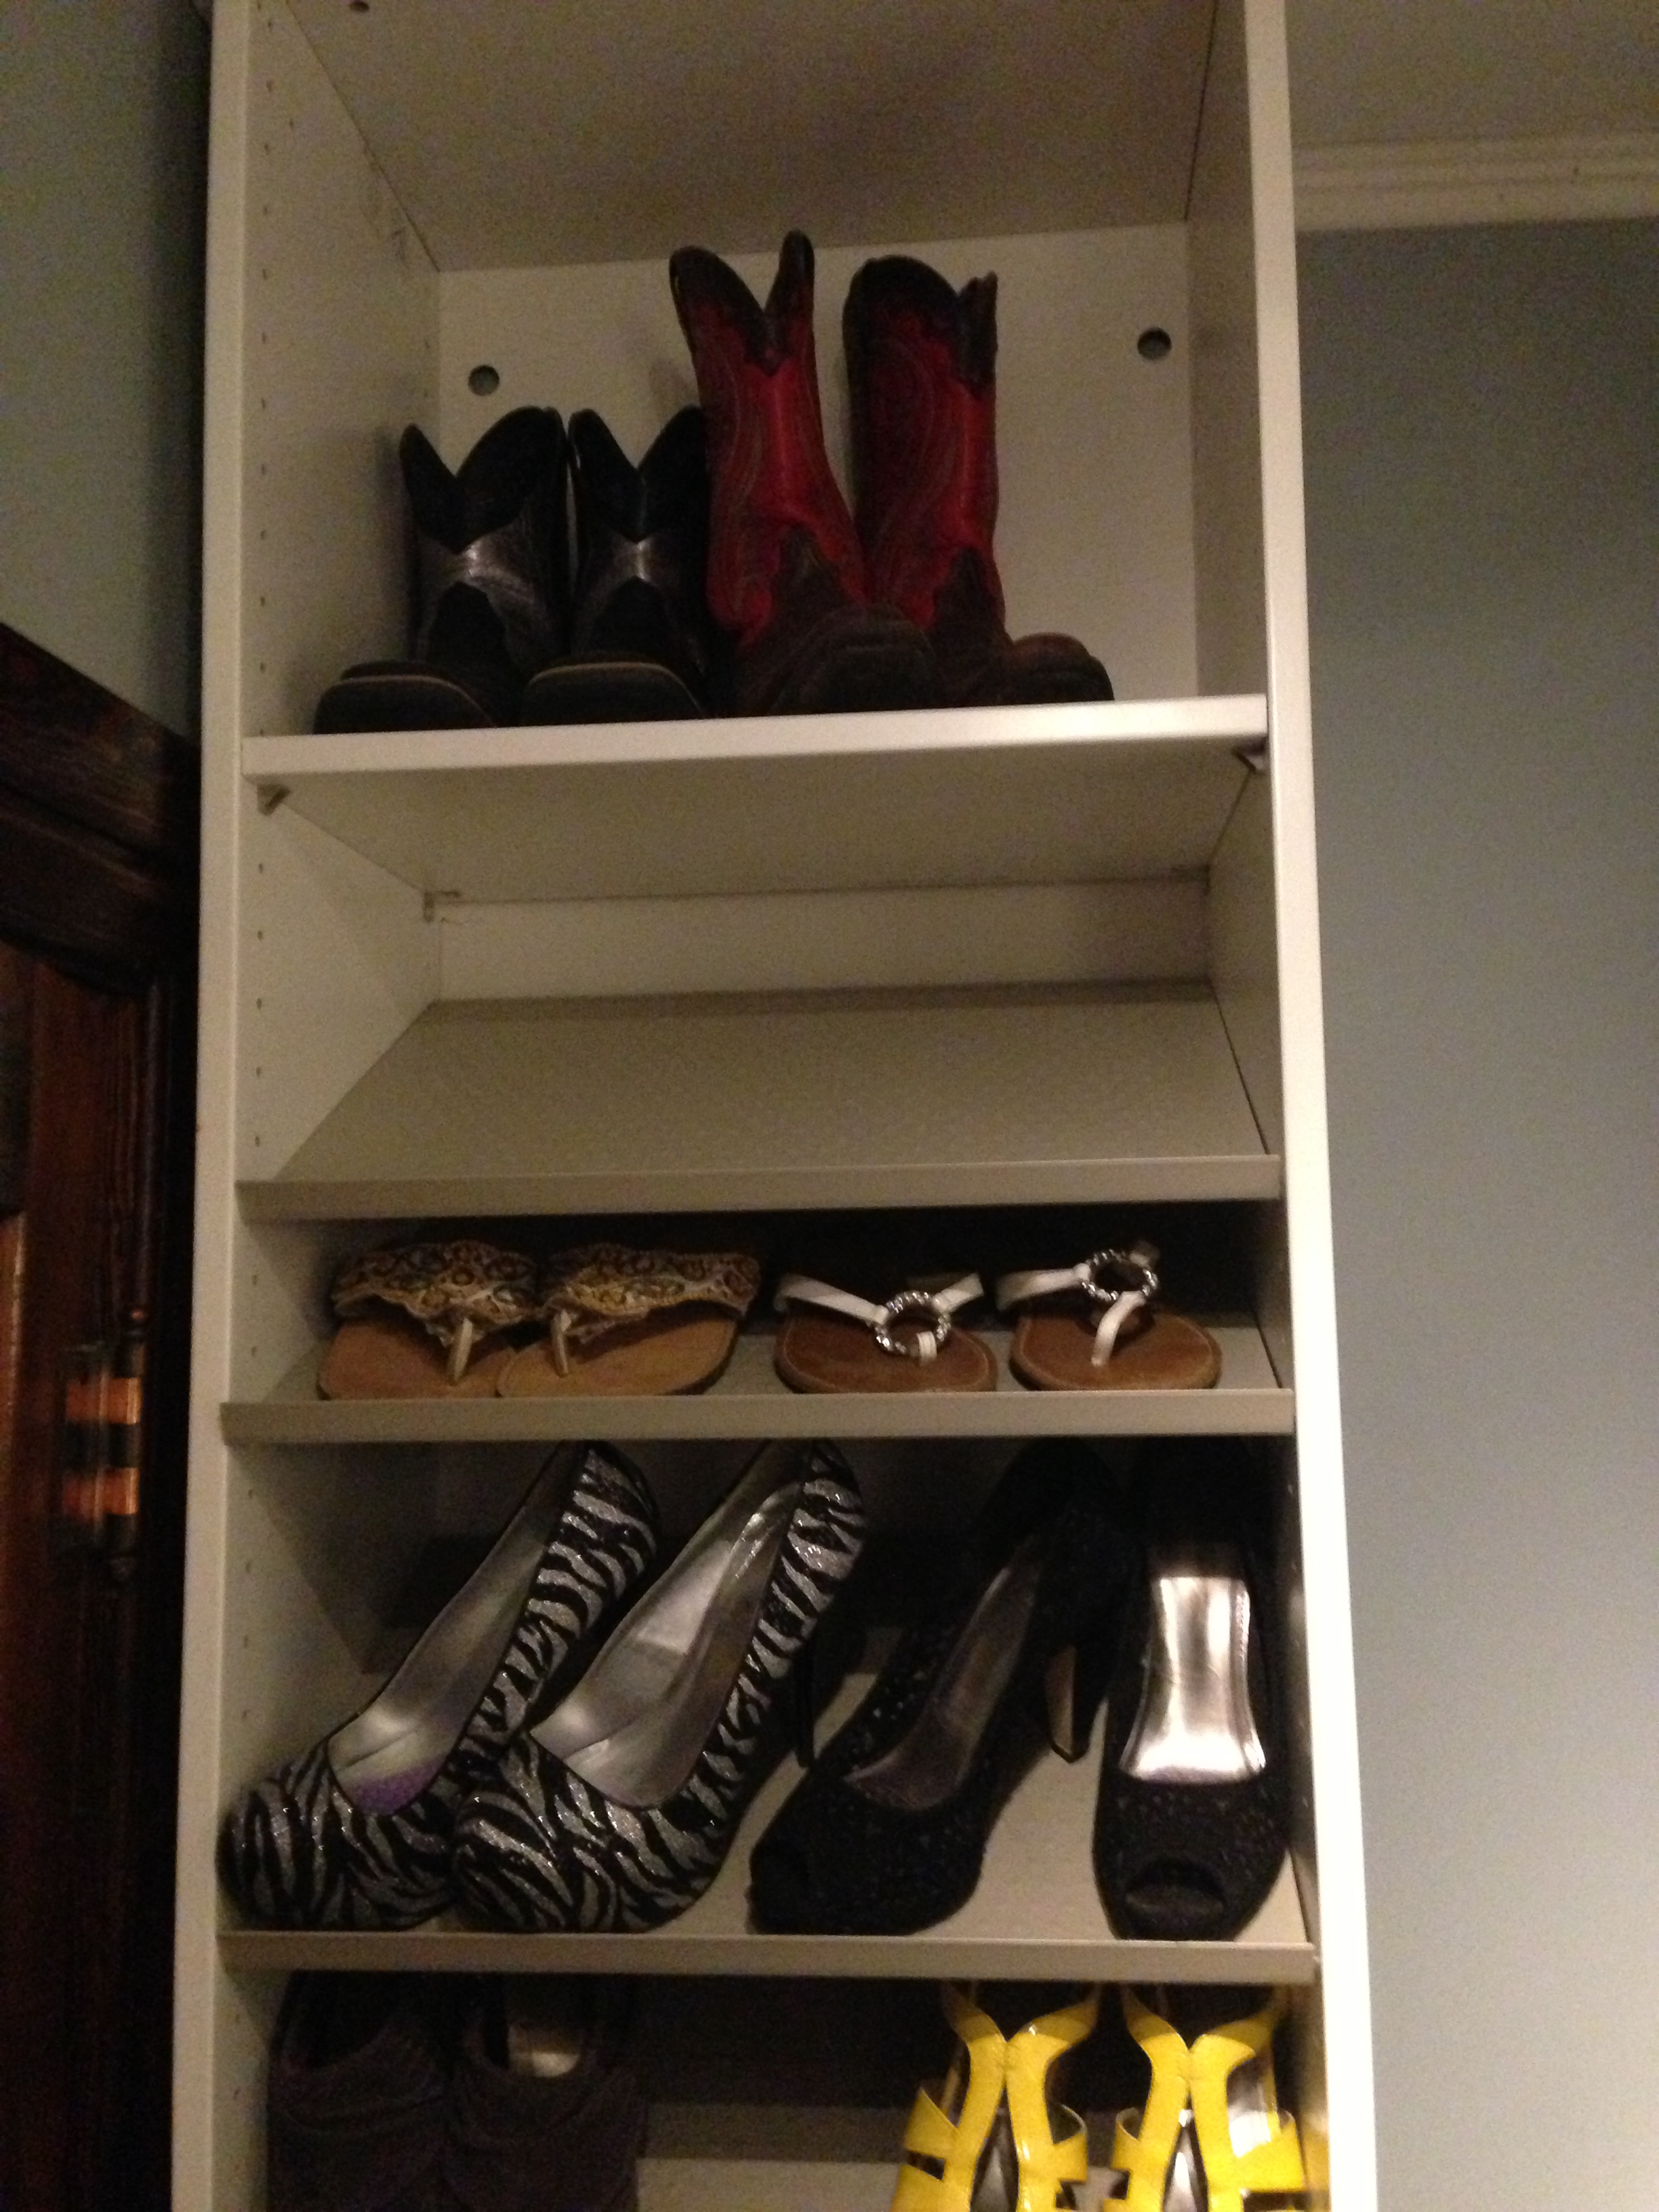 OH my, look at this shoe shelf?!  Everyone should be jealous. 